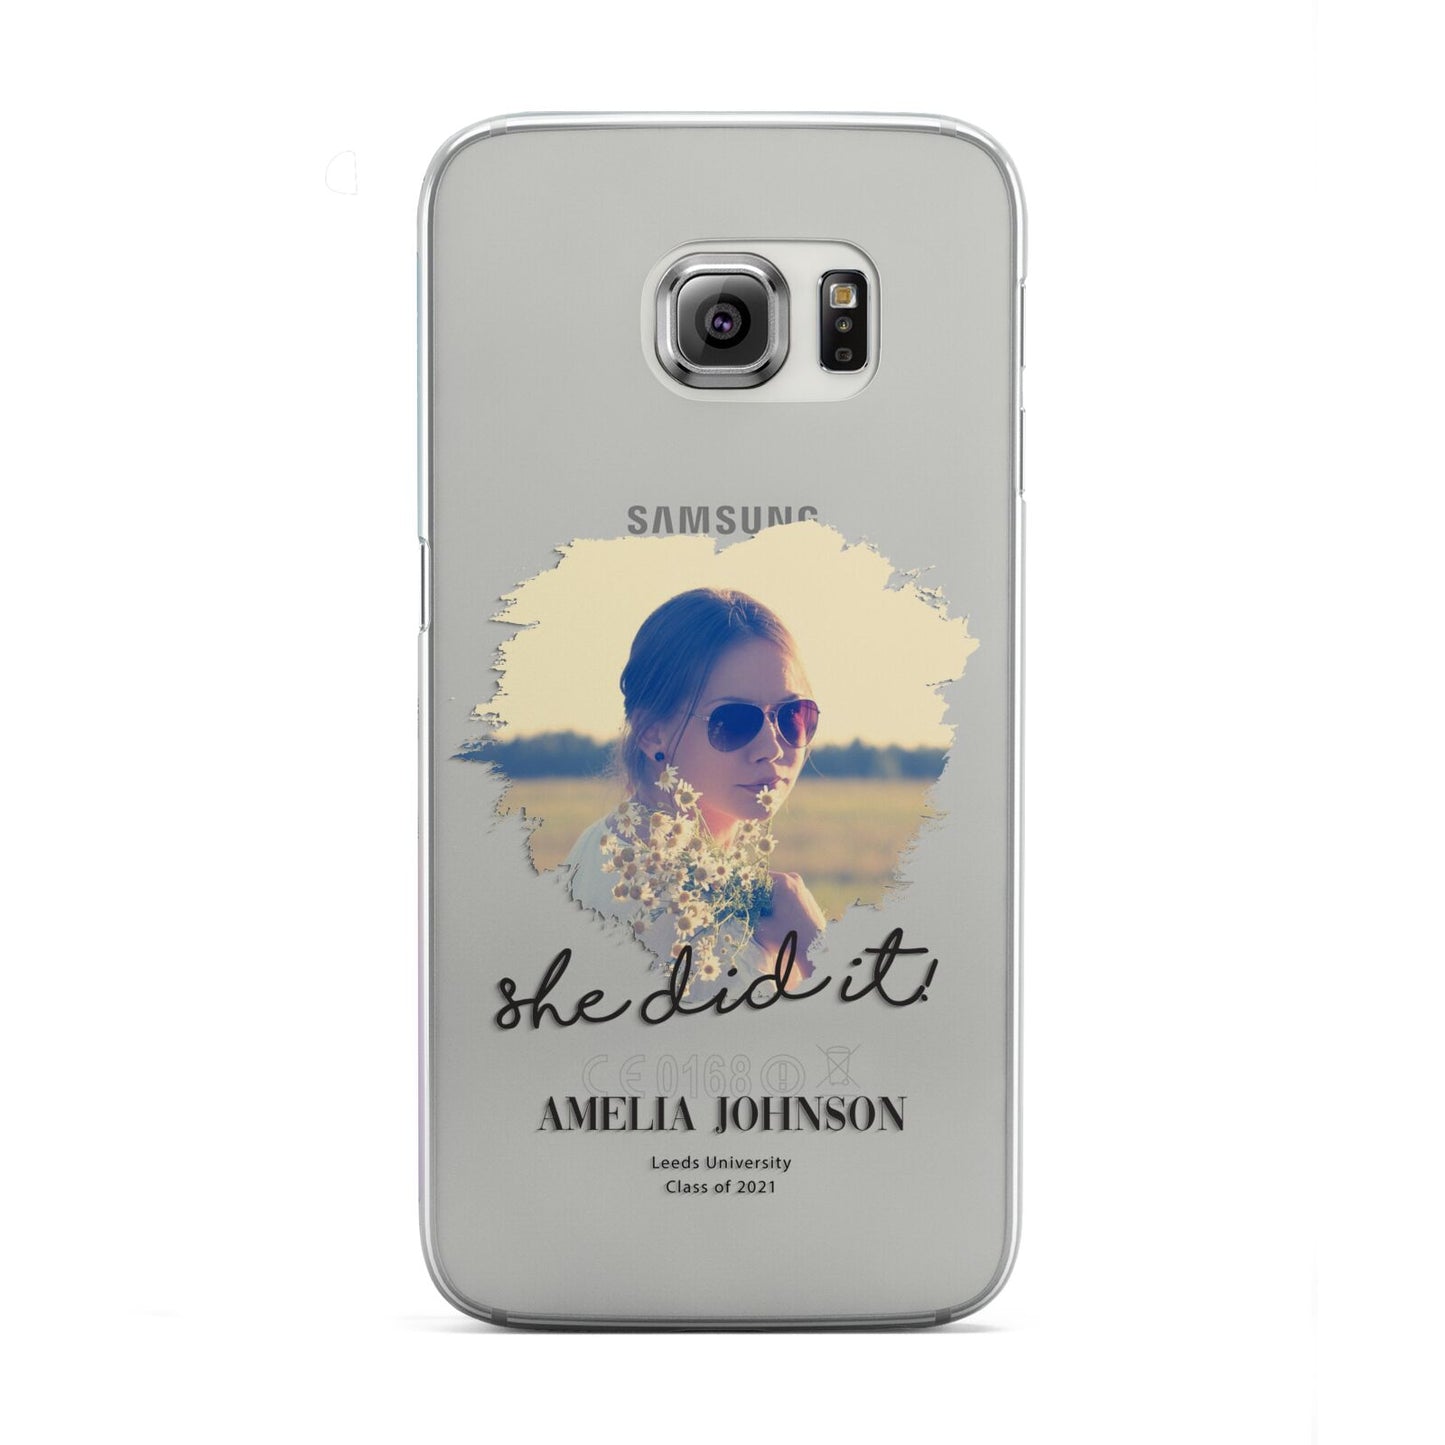 She Did It Graduation Photo with Name Samsung Galaxy S6 Edge Case